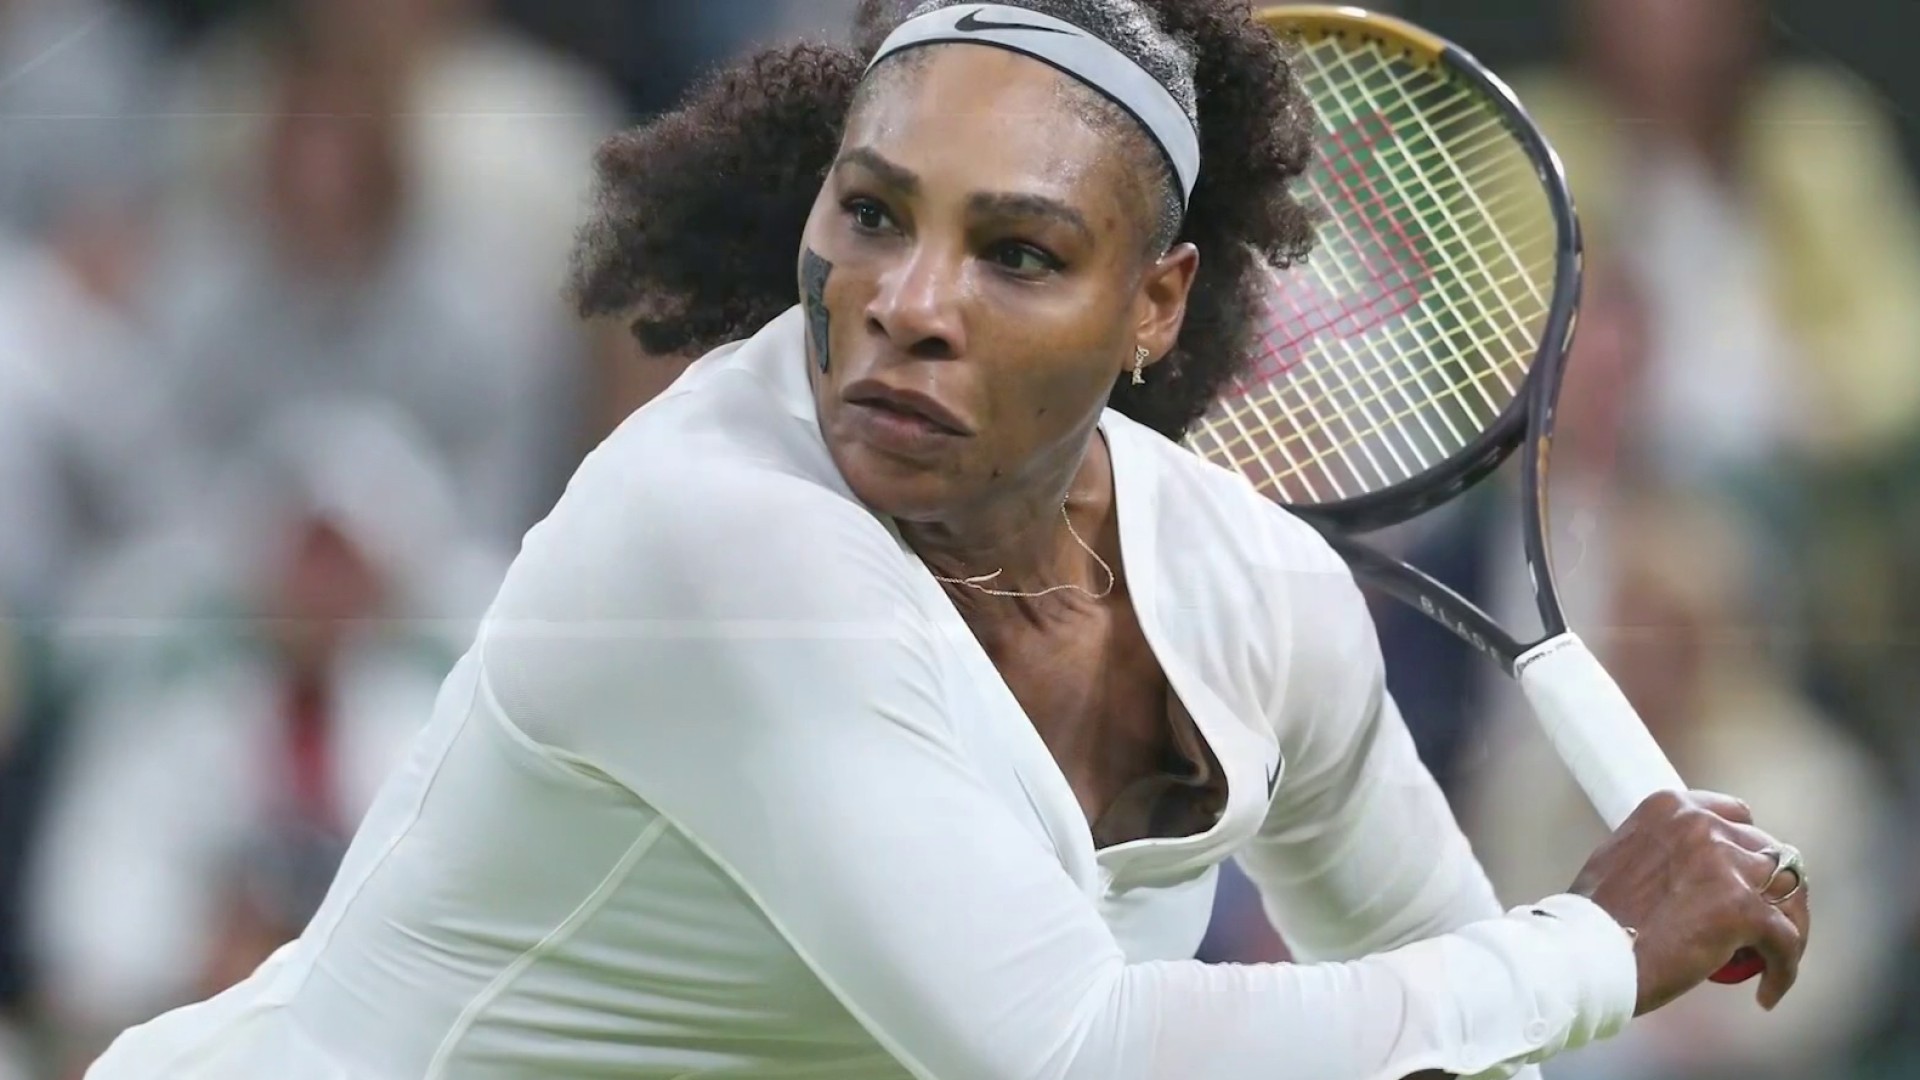 Serena Williams will retire from tennis, but leaves a legacy of influence  on Black girls and women